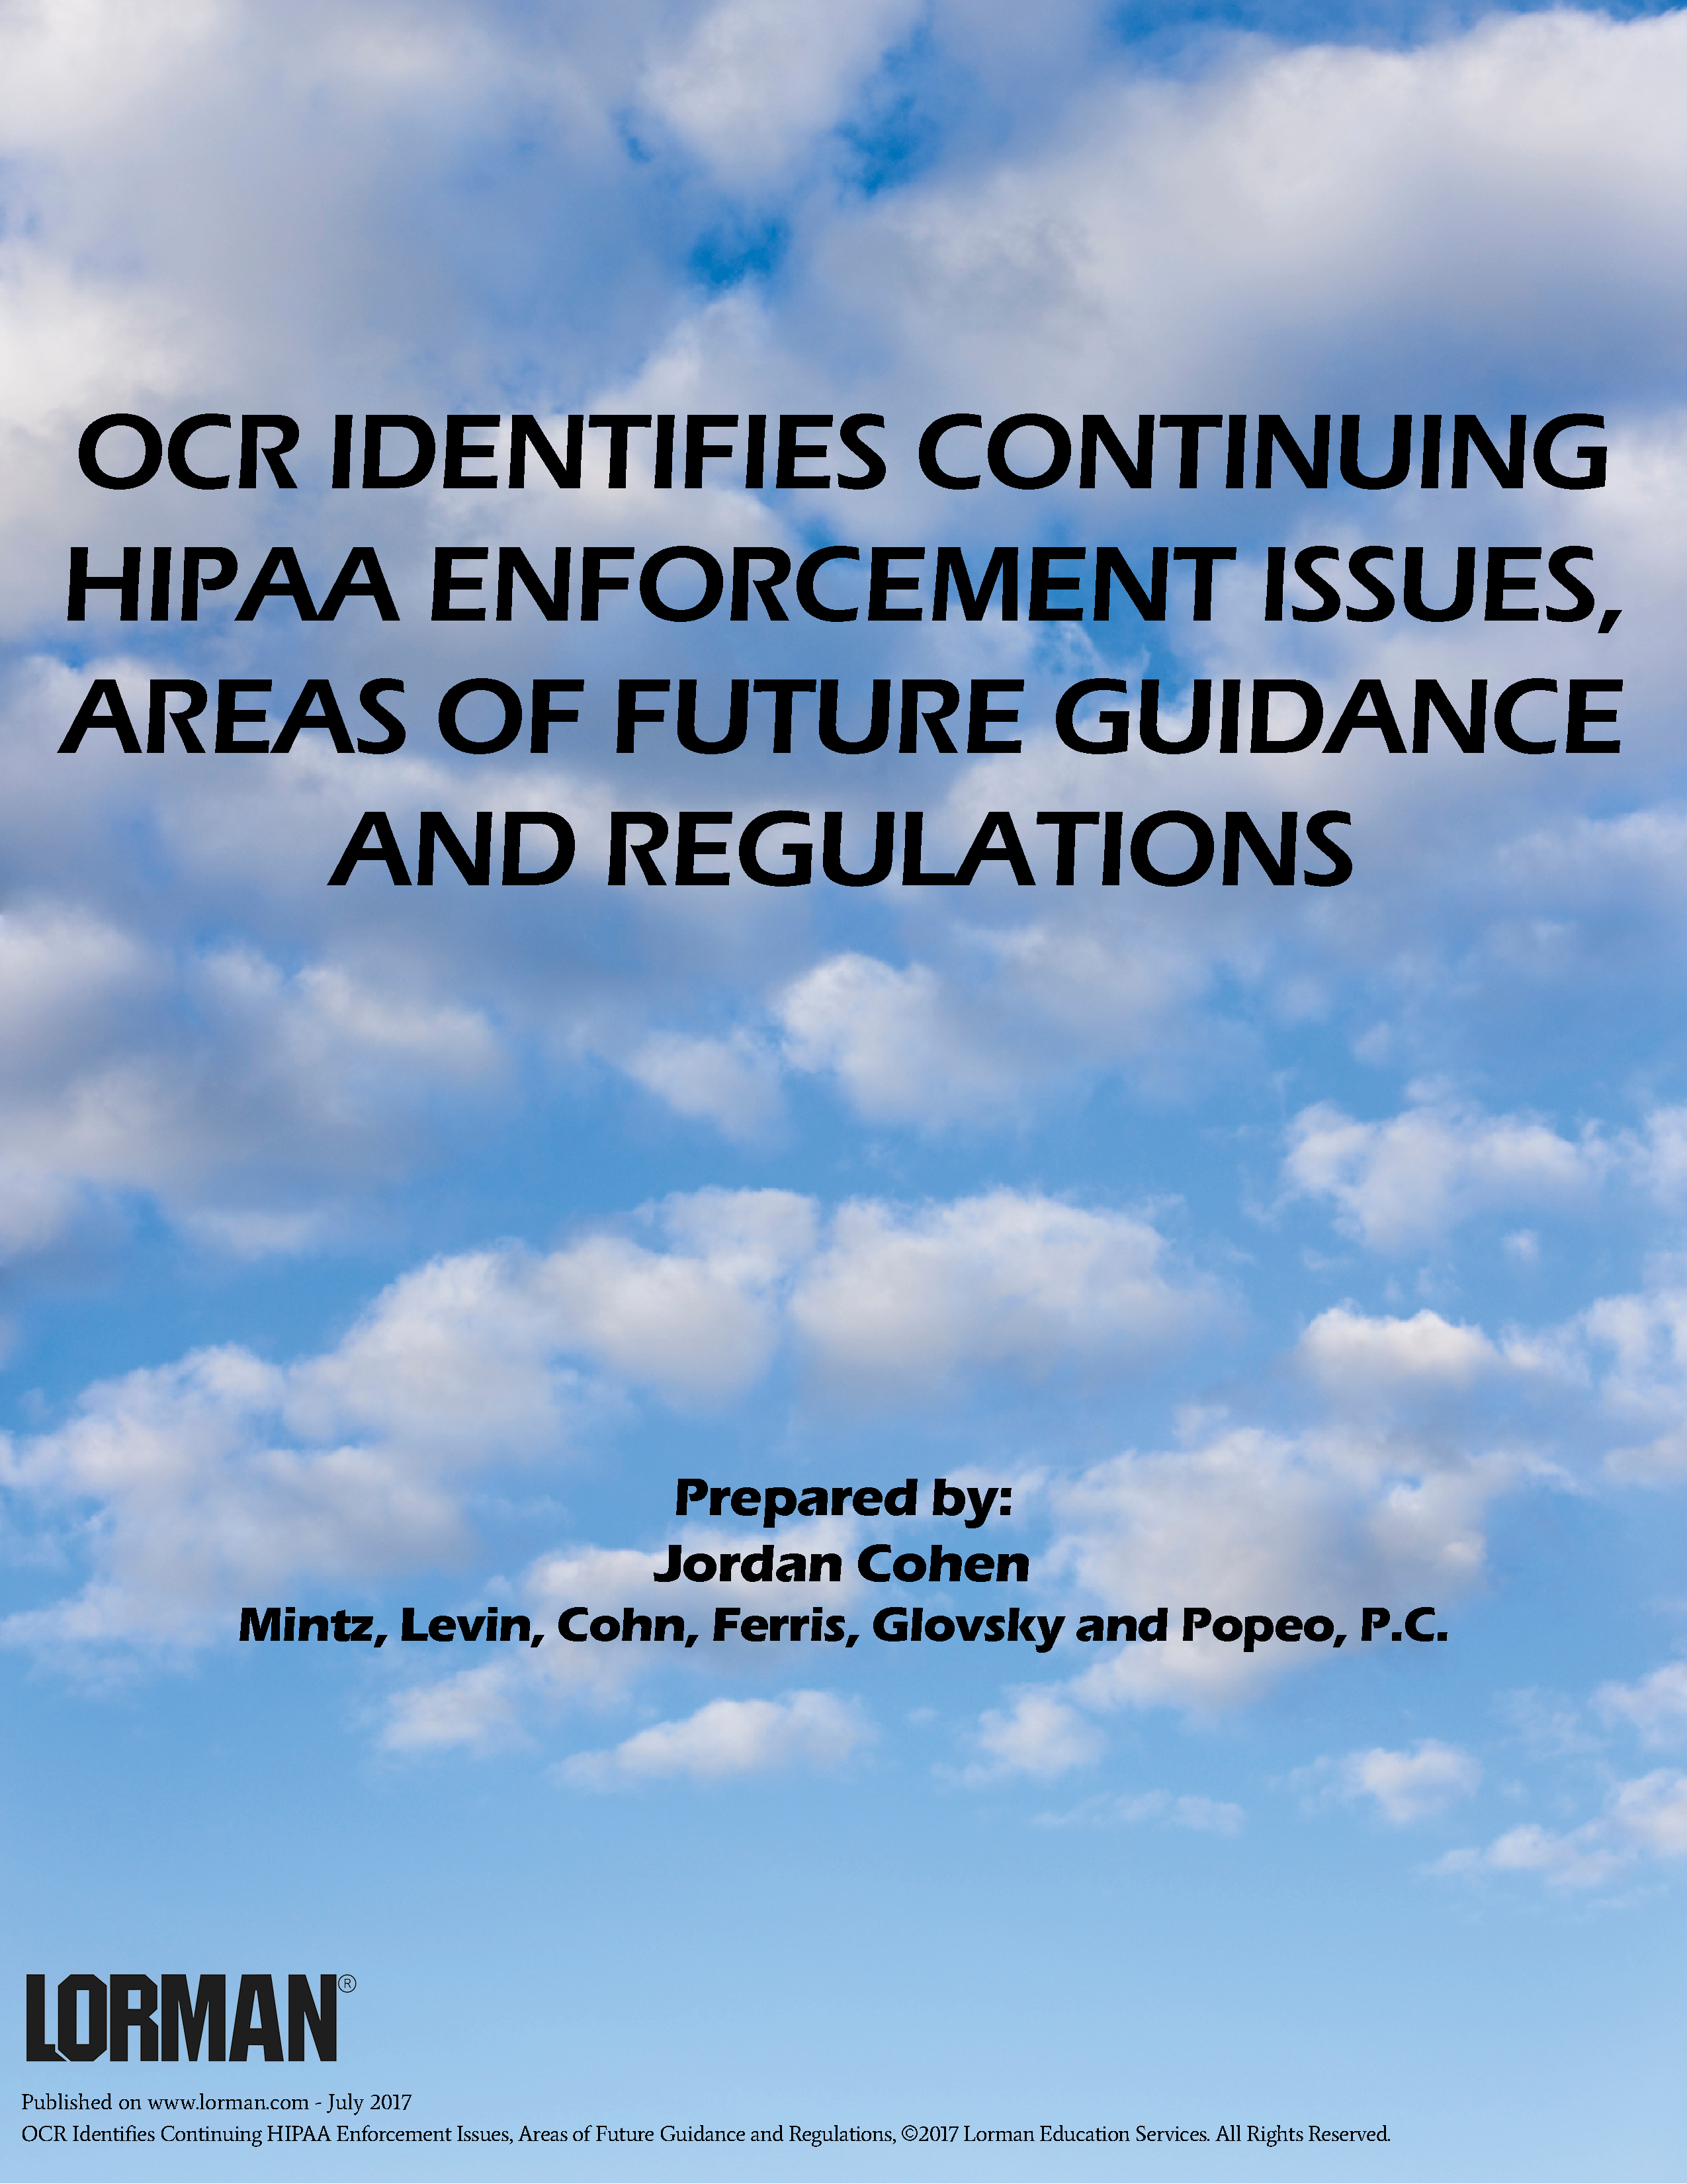 OCR Identifies Continuing HIPAA Enforcement Issues, Areas of Future Guidance and Regulations